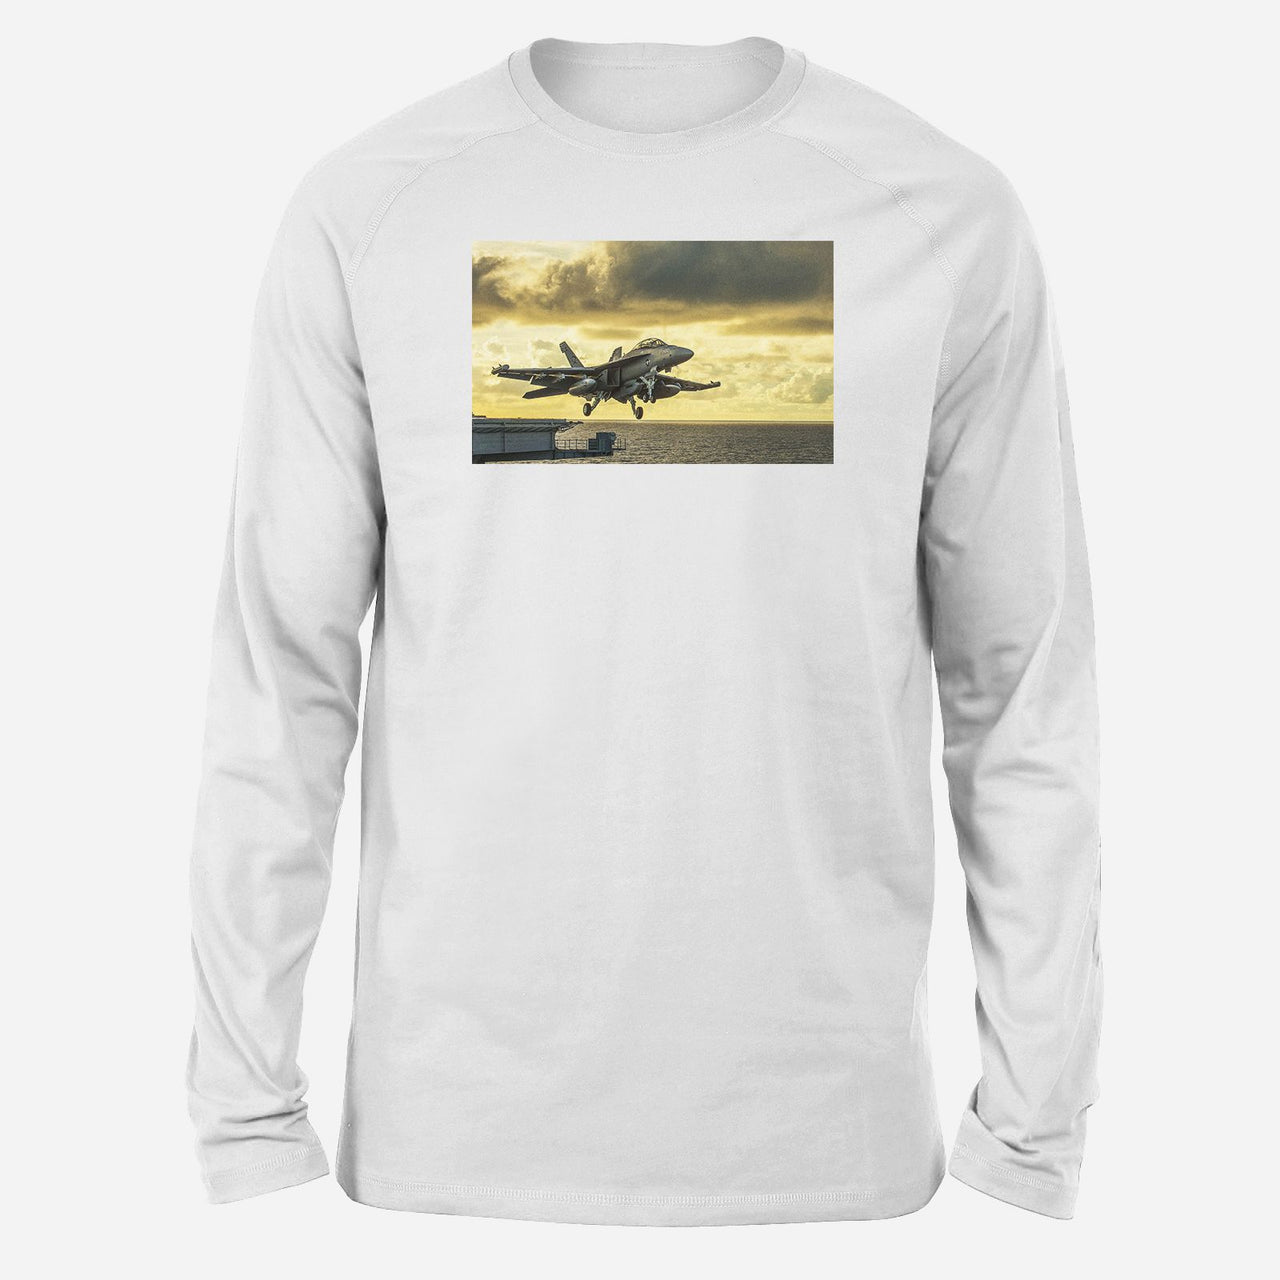 Departing Jet Aircraft Designed Long-Sleeve T-Shirts